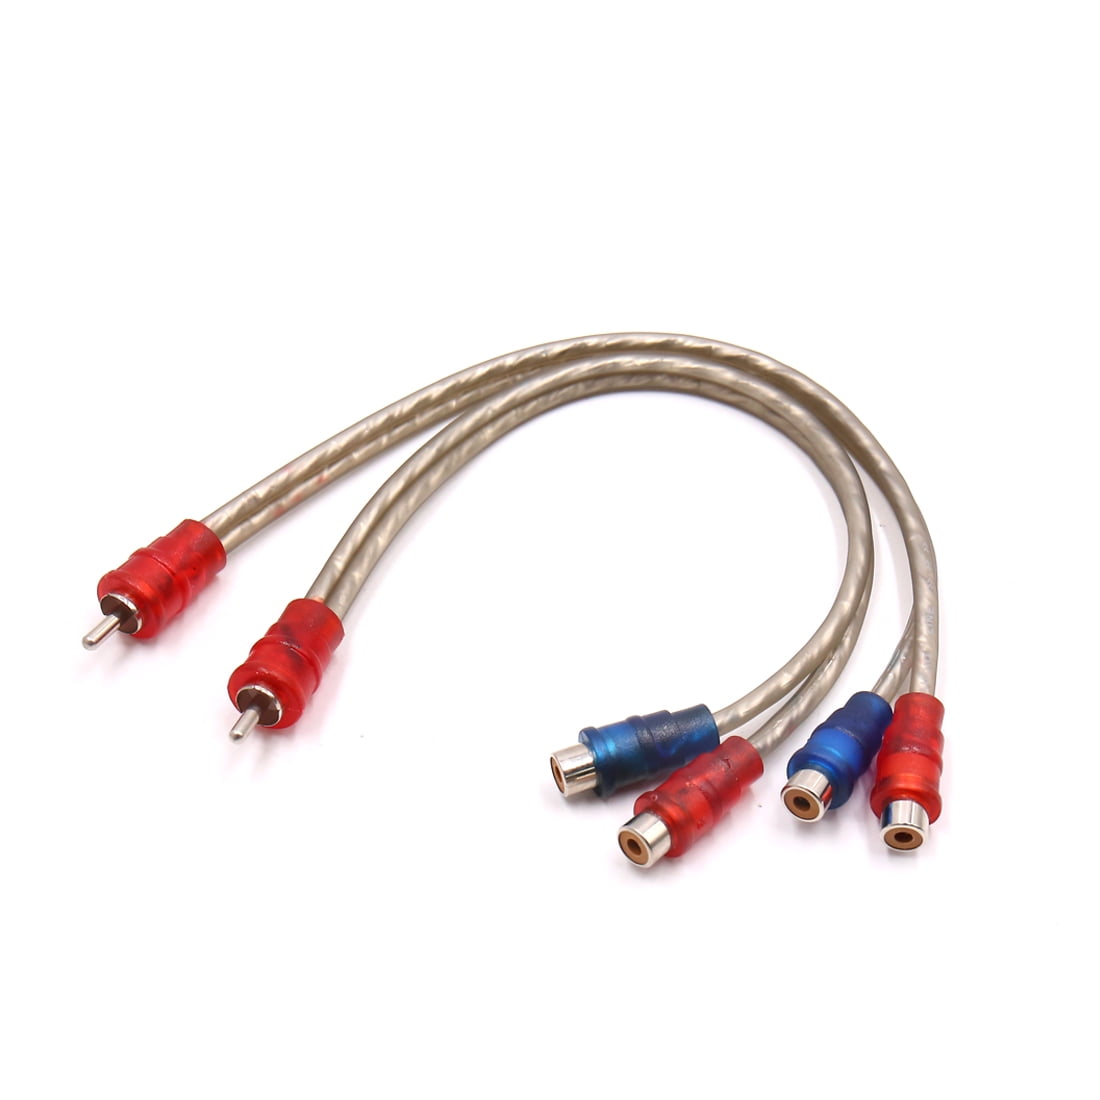 2Pcs 28cm 2 Female to 1 Male RCA Splitter Adapter Audio Y Cable Wire for Car 